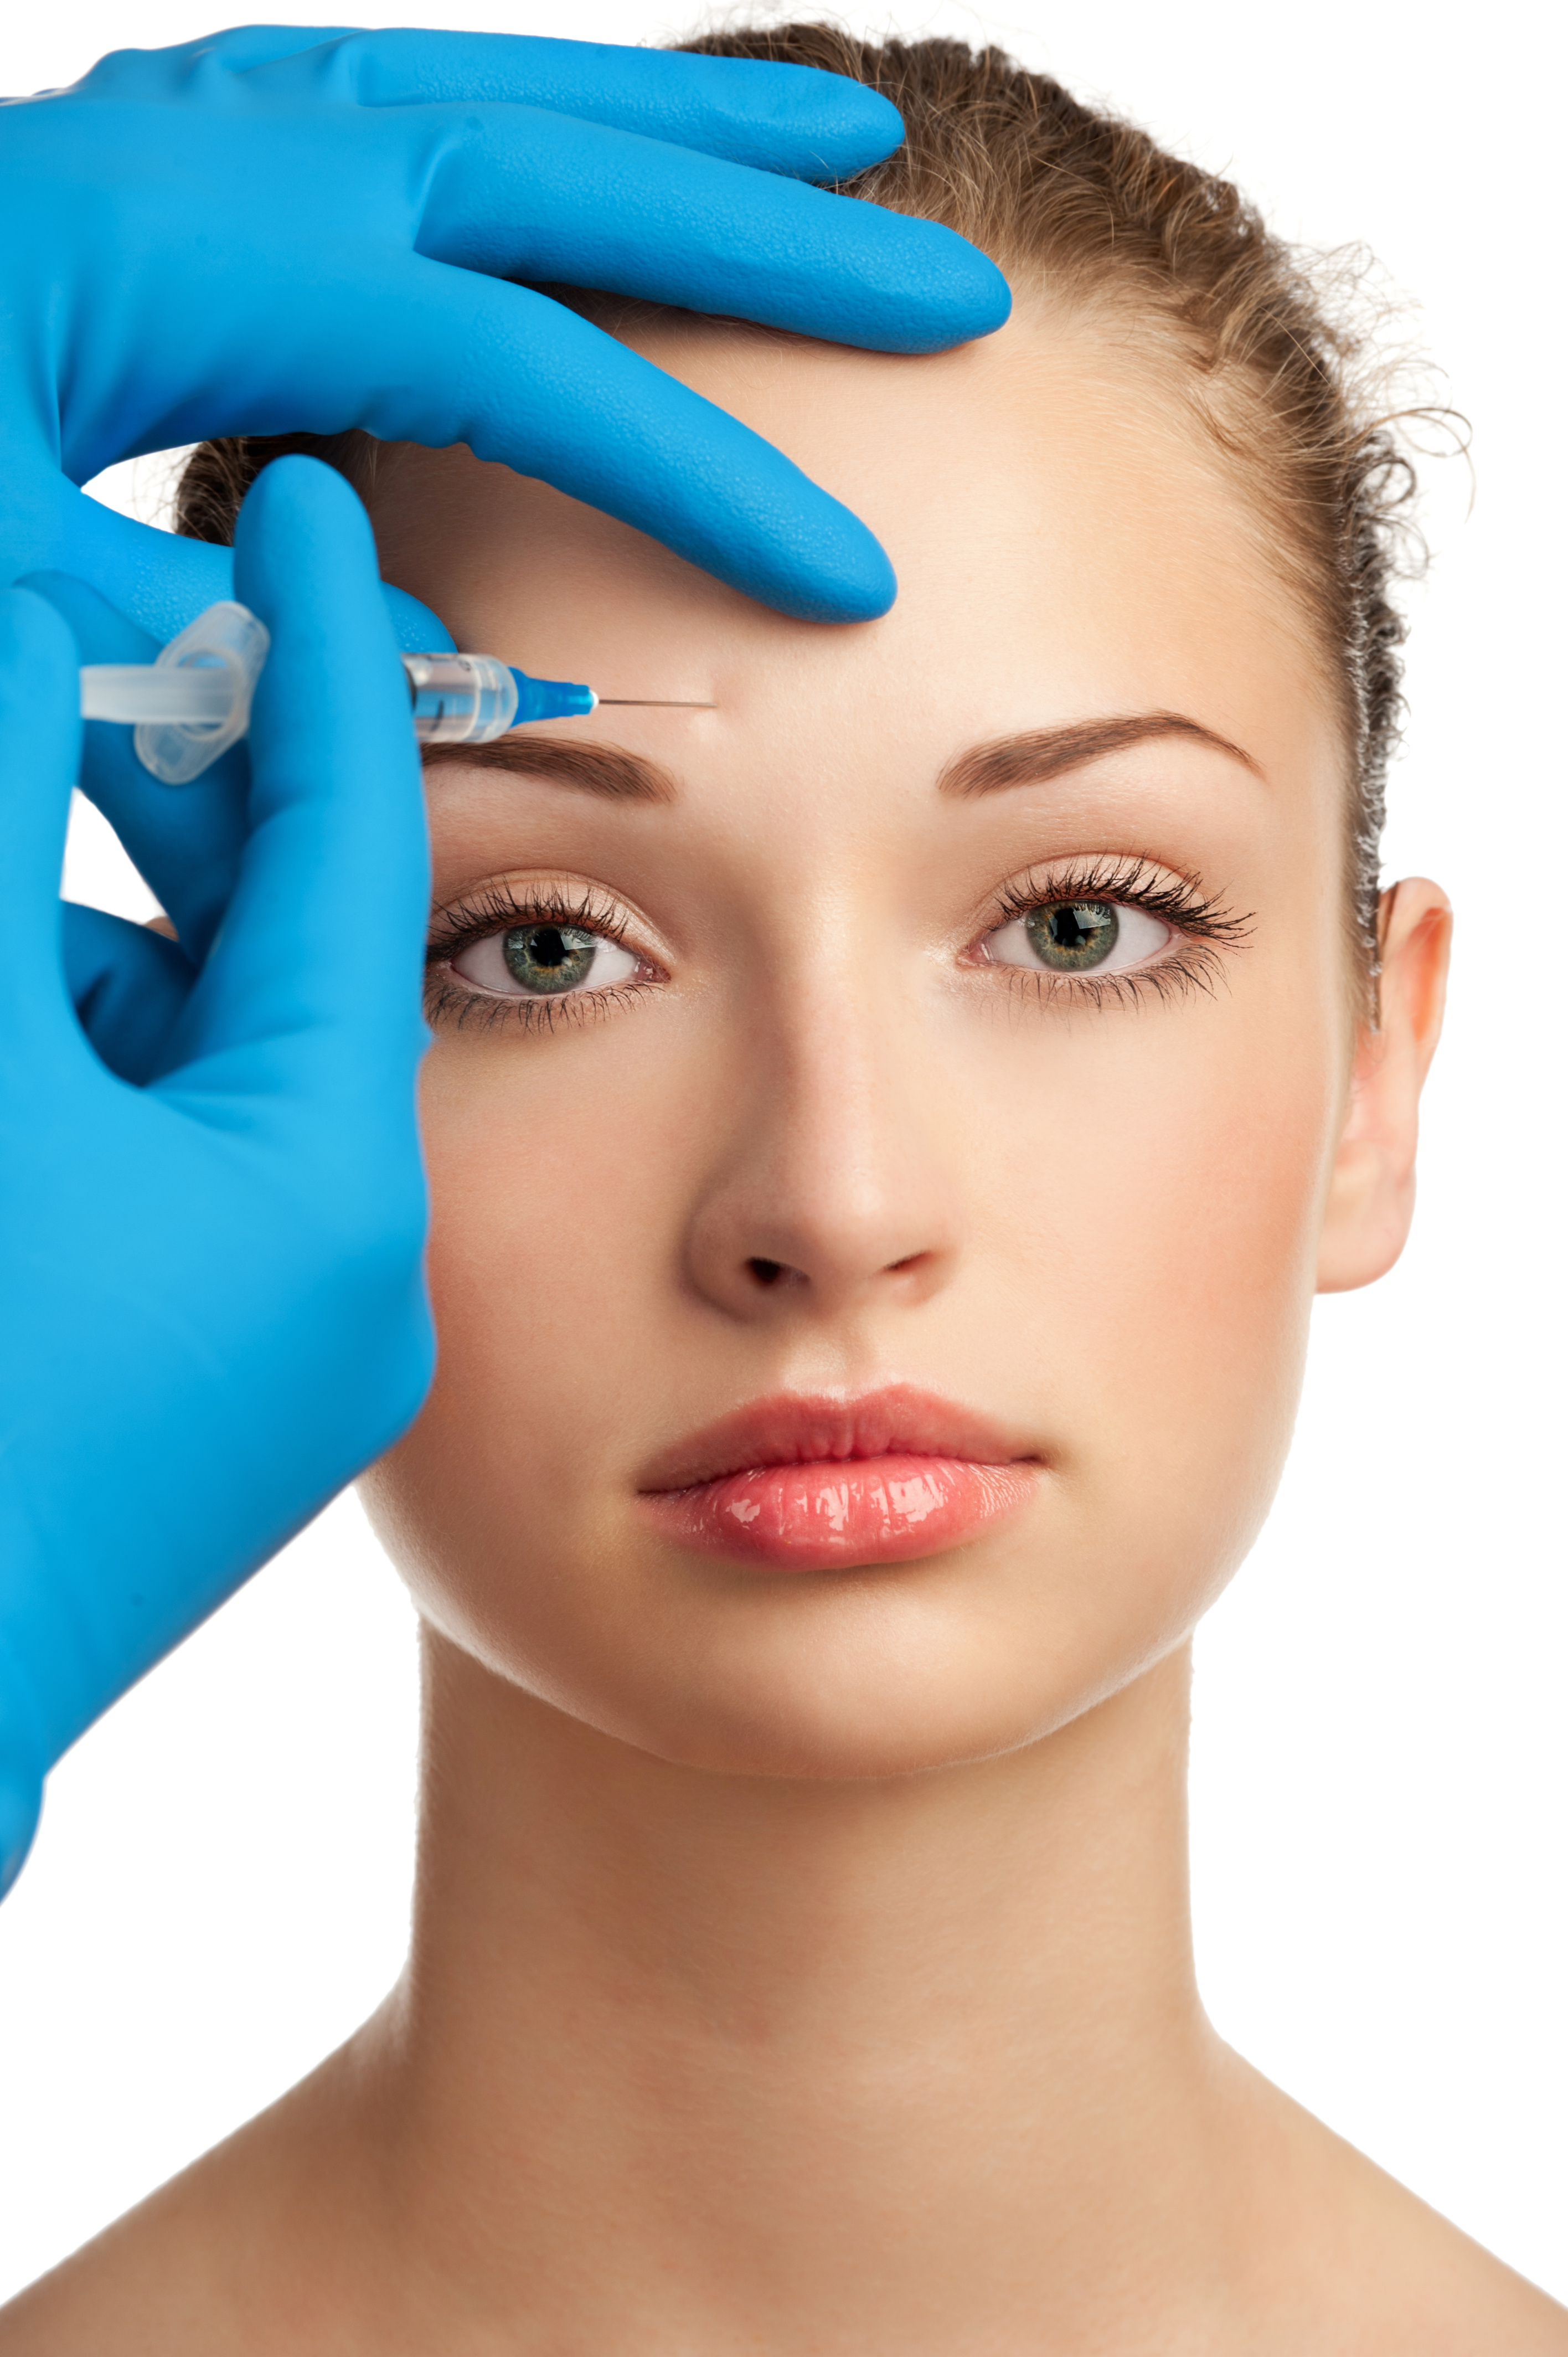 How can Botox be used to treat Worry Lines?